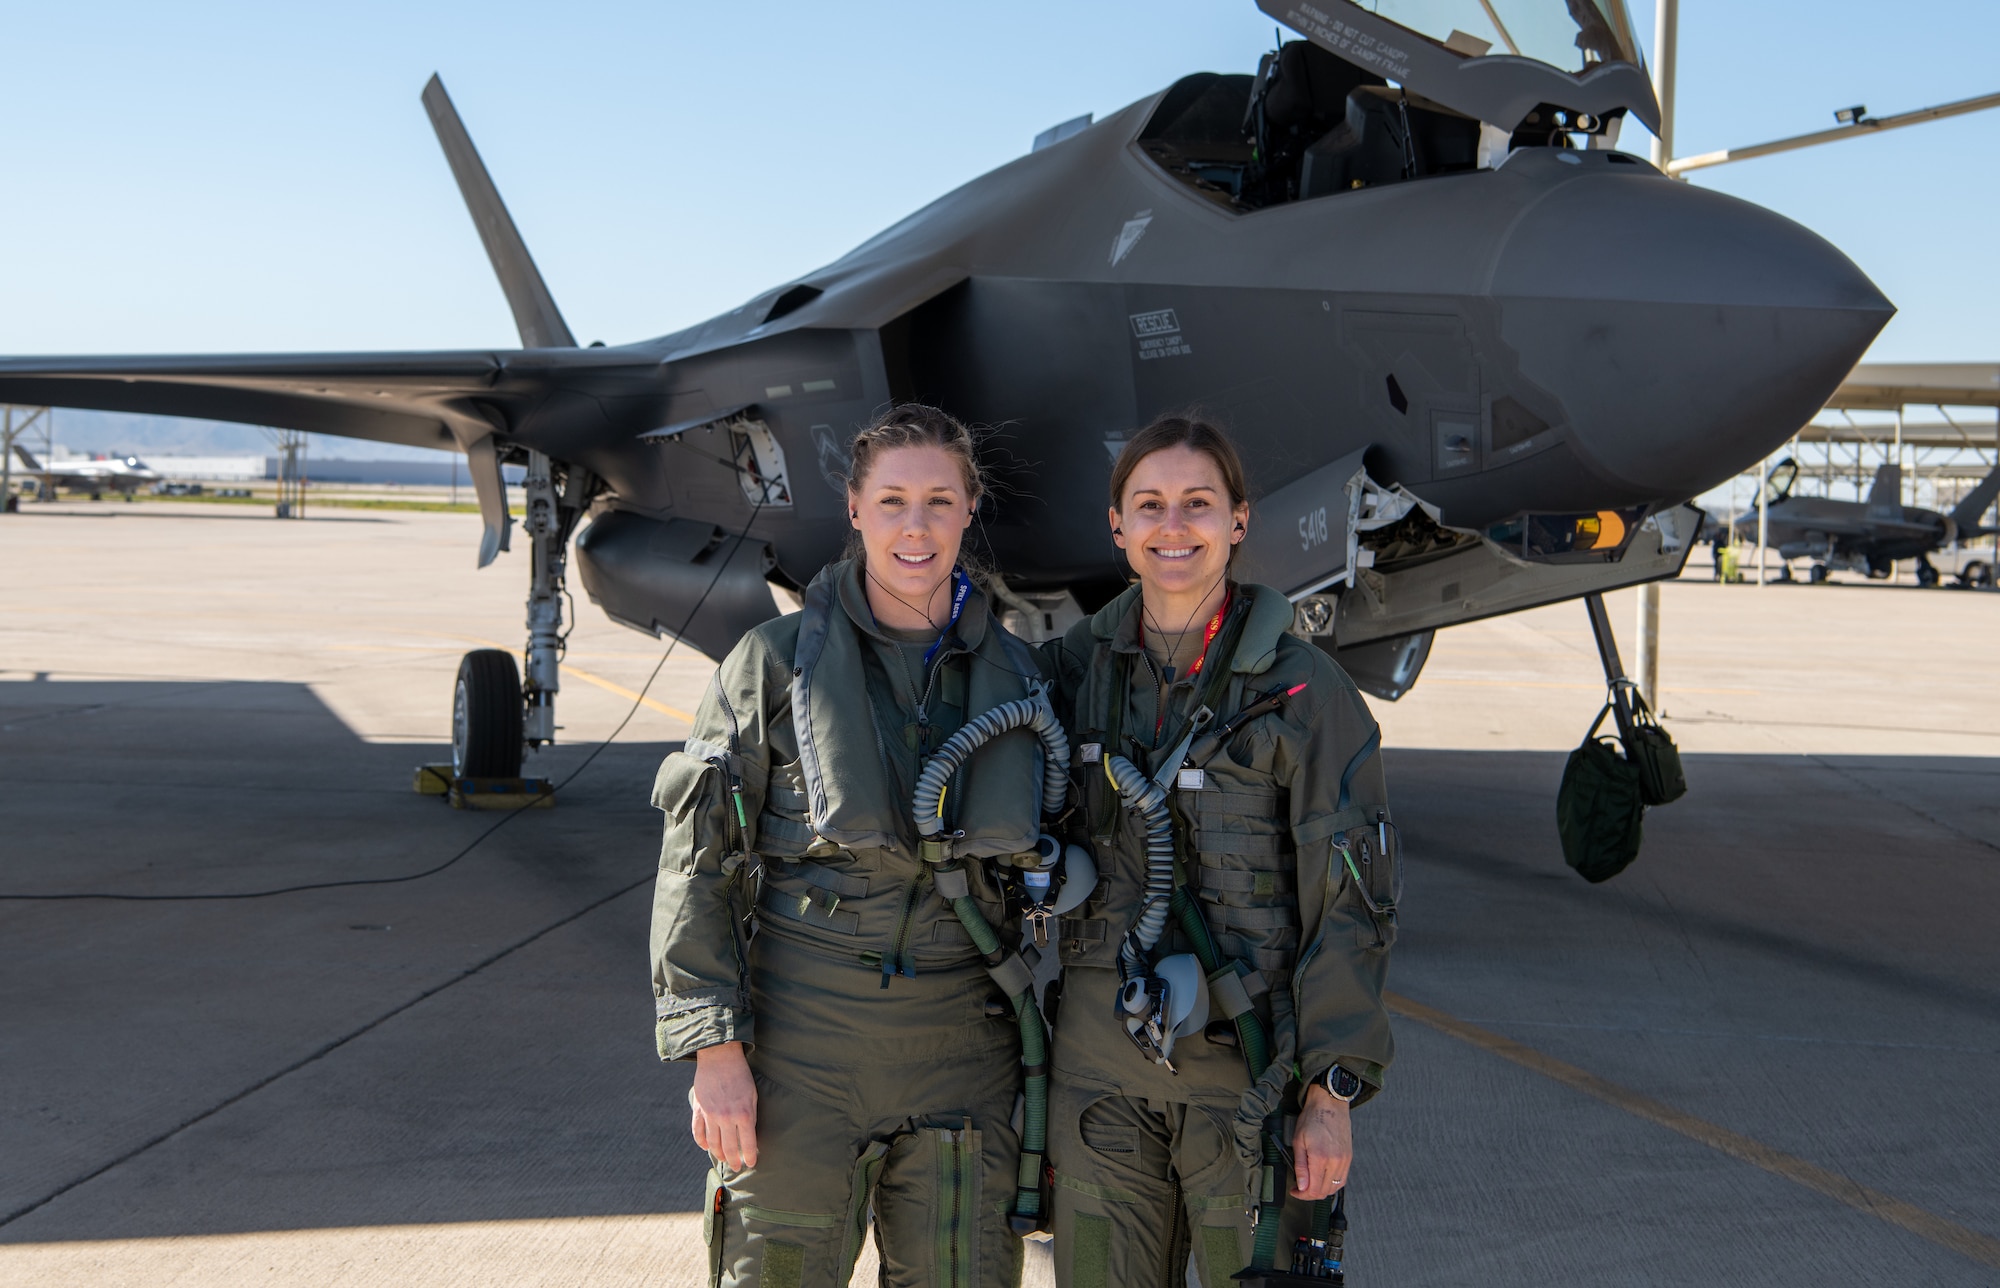 U.S. Air Force Capt. Sara Eagle (left), F-35 student pilot and U.S. Air Force Capt. Melanie Kluesner (right), 62nd Fighter Squadron F-35 instructor pilot, pose for a photo before a sortie at Luke Air Force Base, Arizona, Mar. 28, 2023.